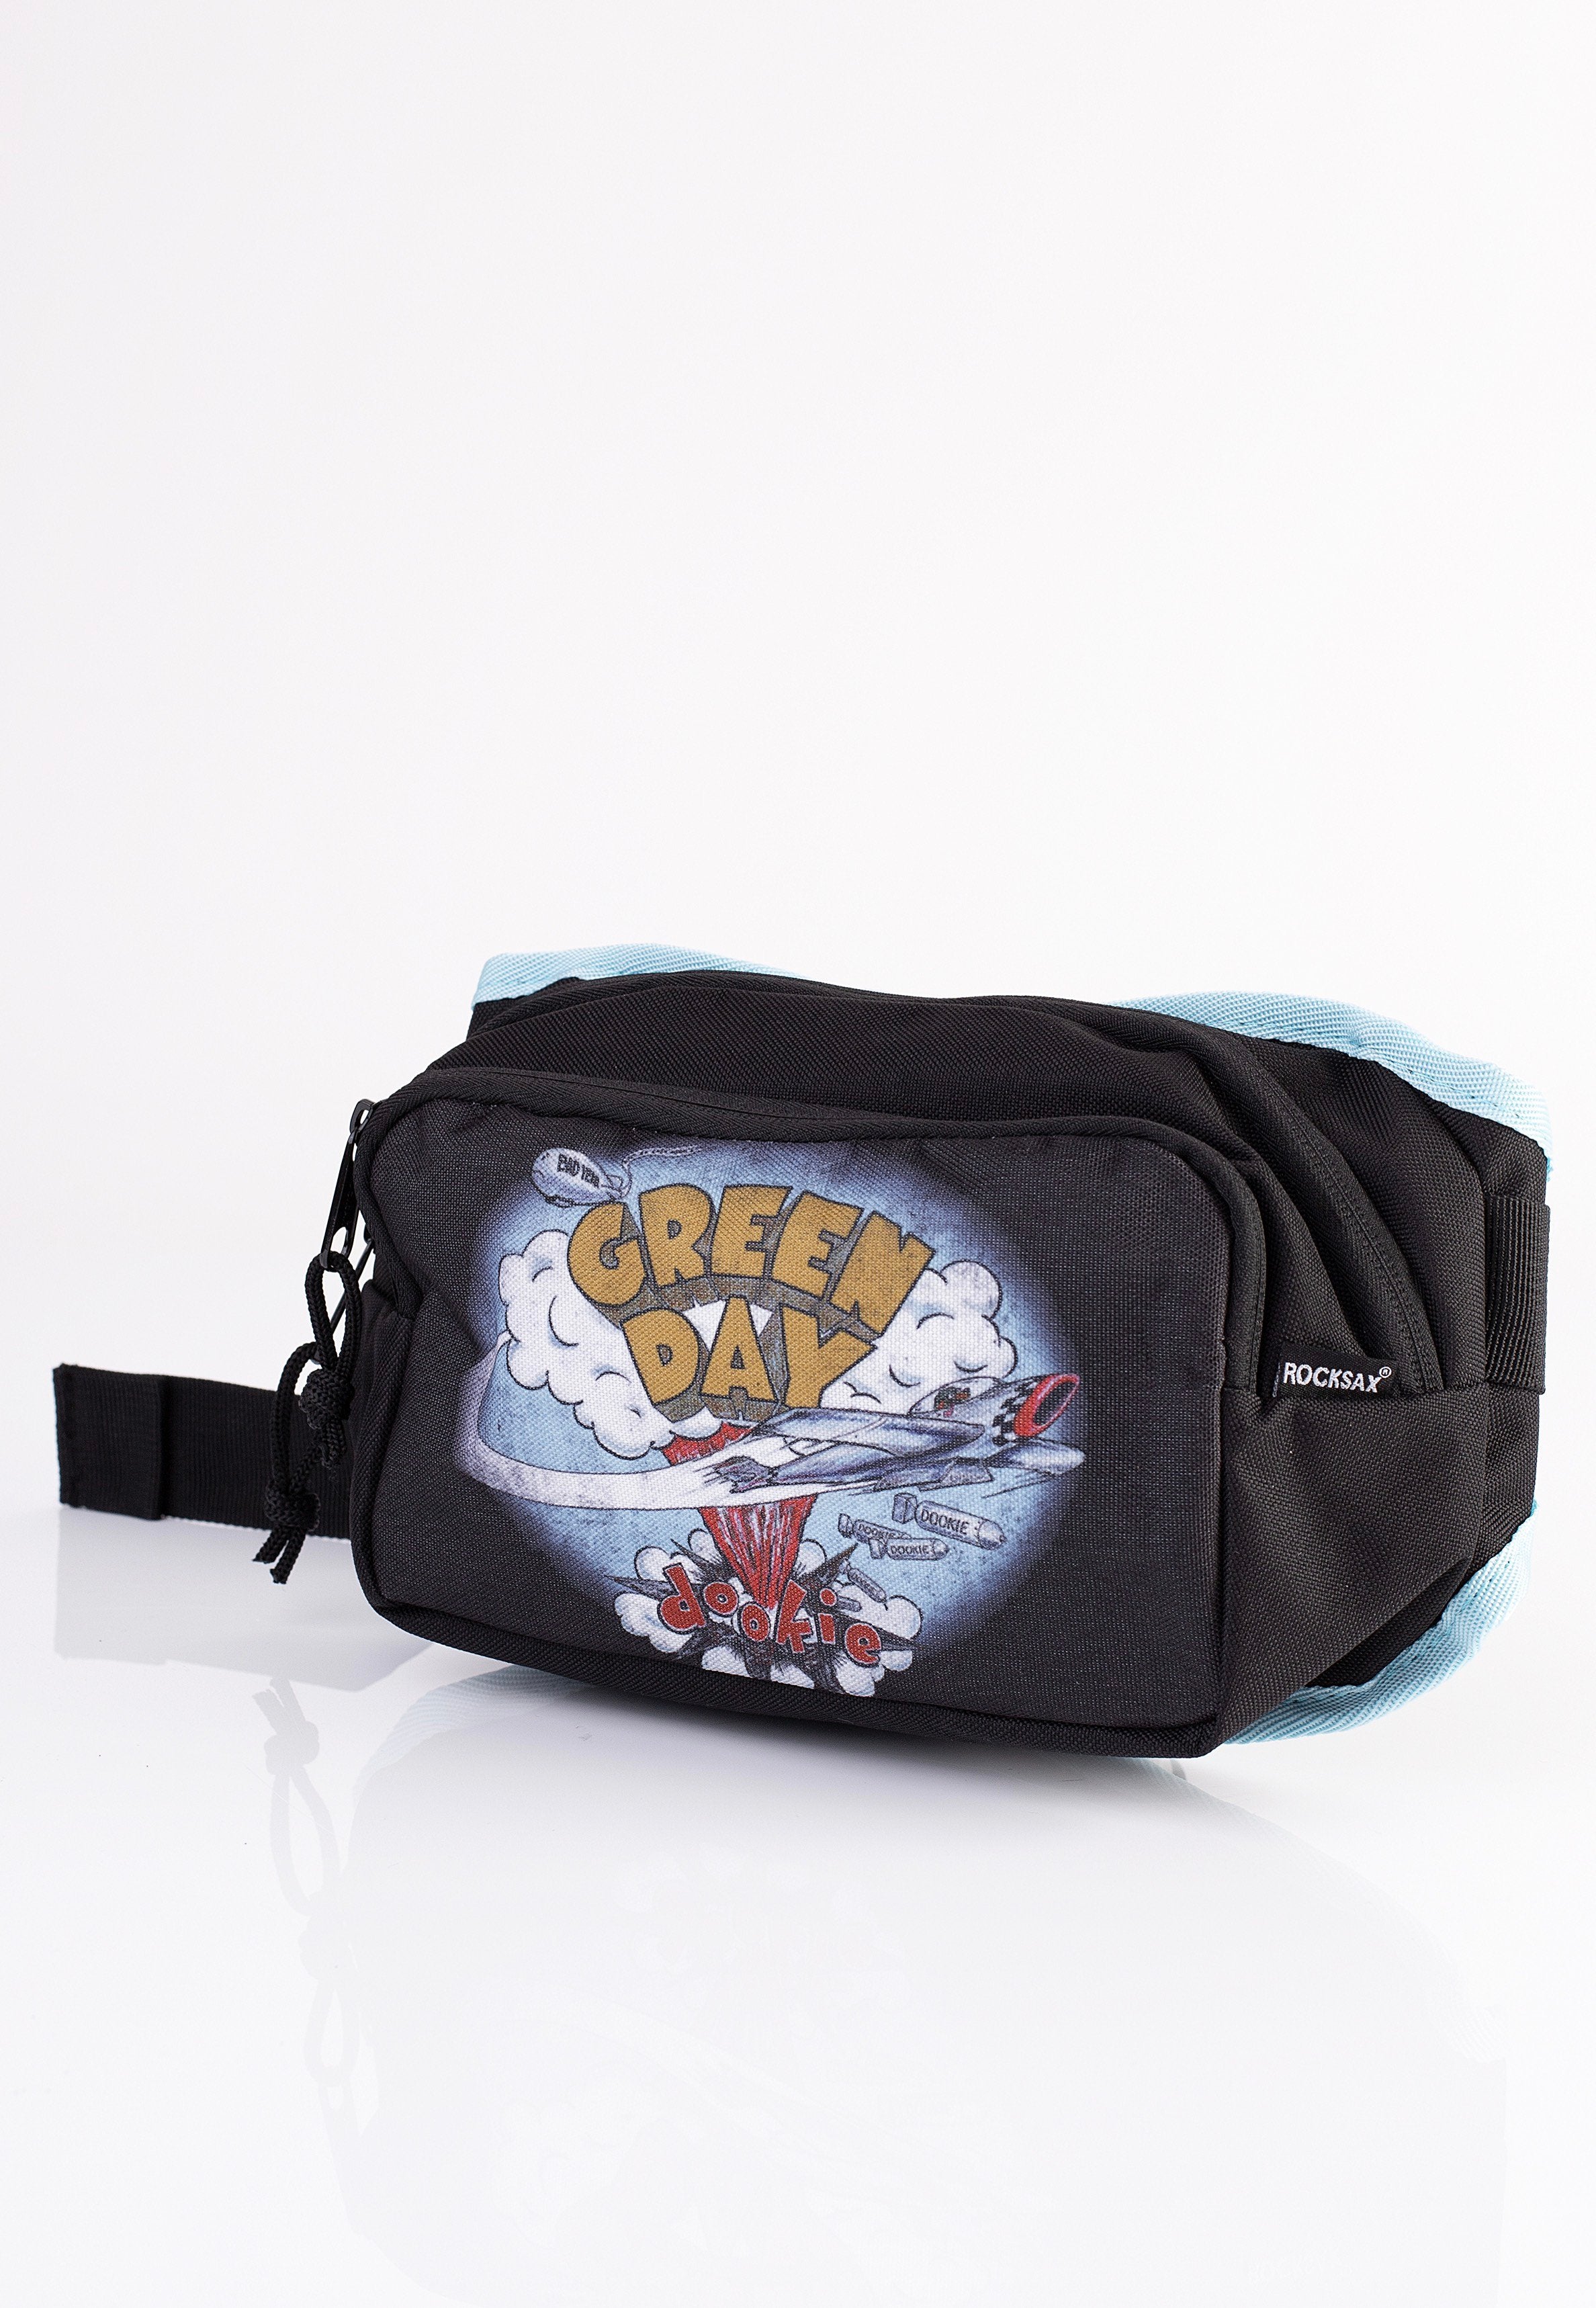 Green Day - Dookie - Hip Bag